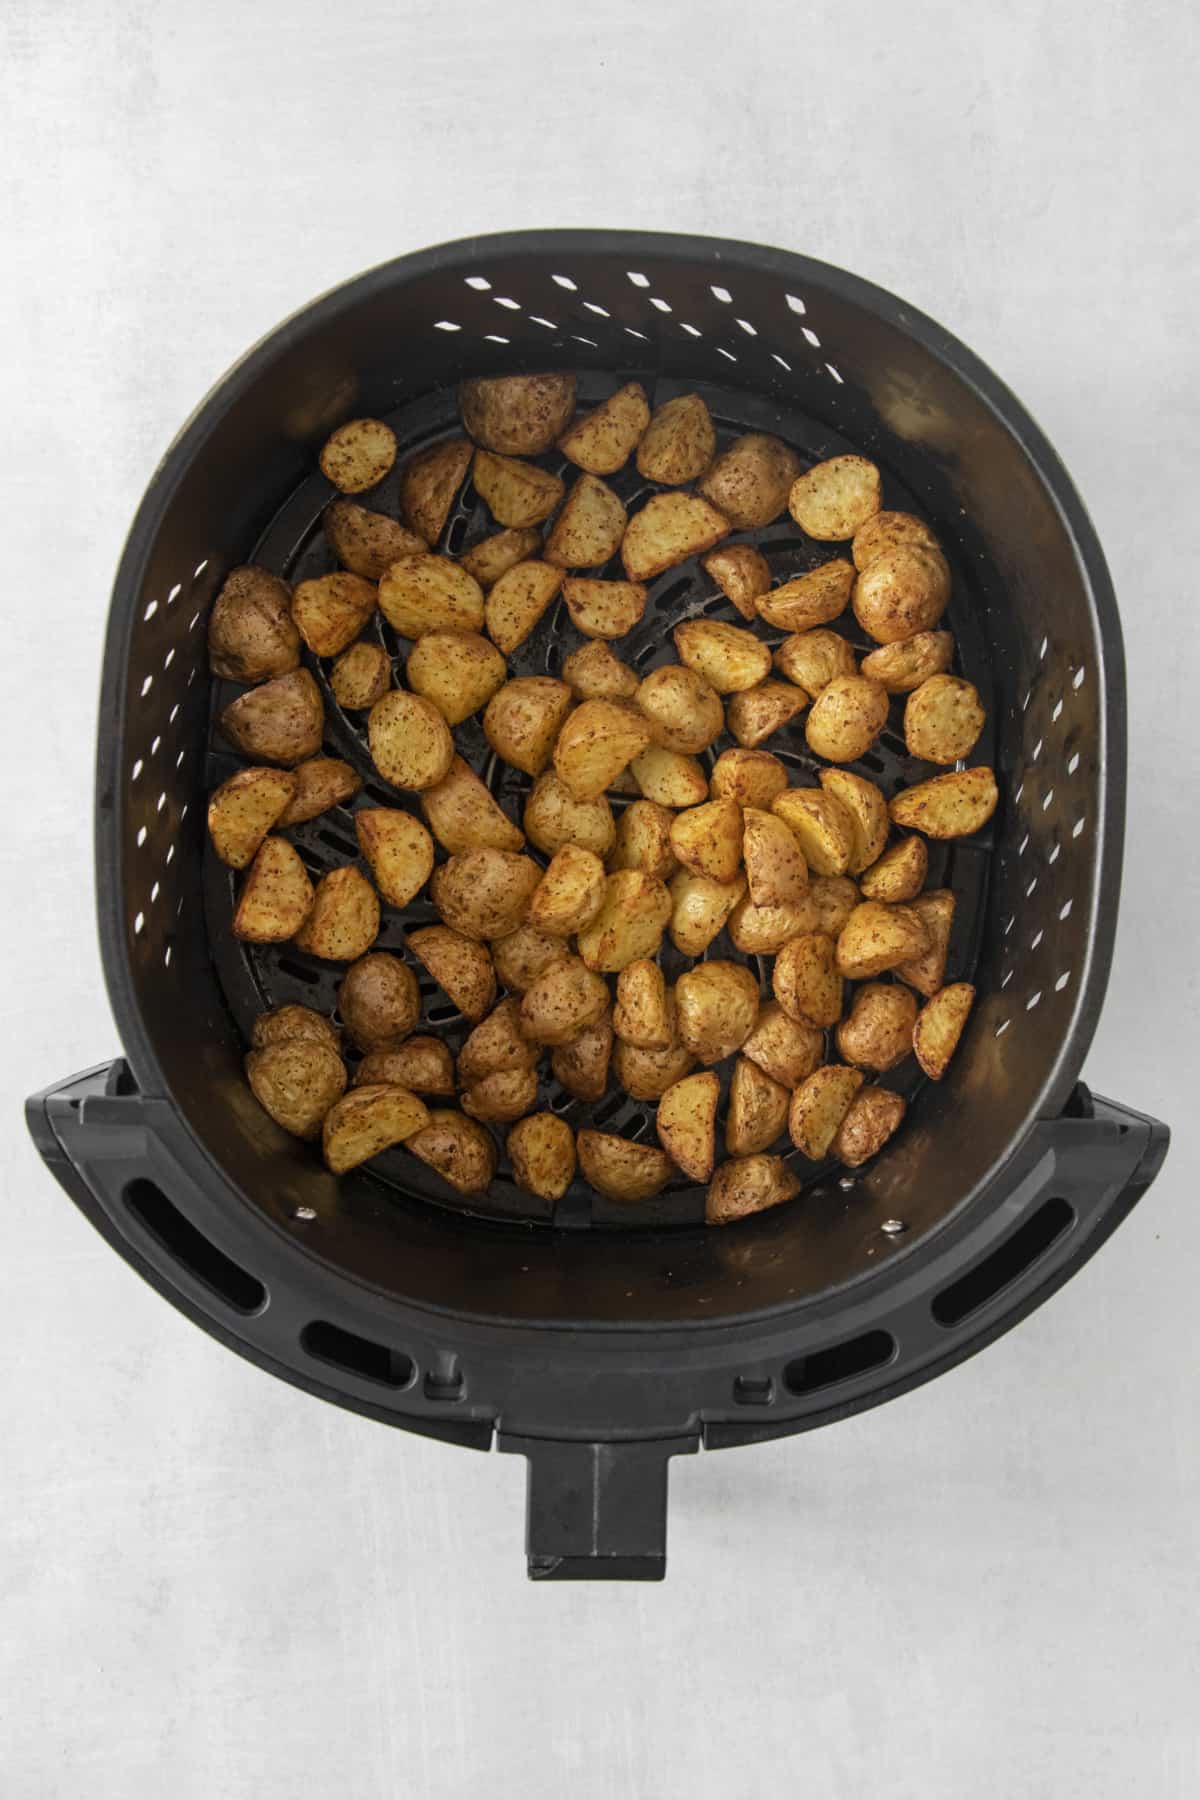 roasted potatoes in the air fryer basket.